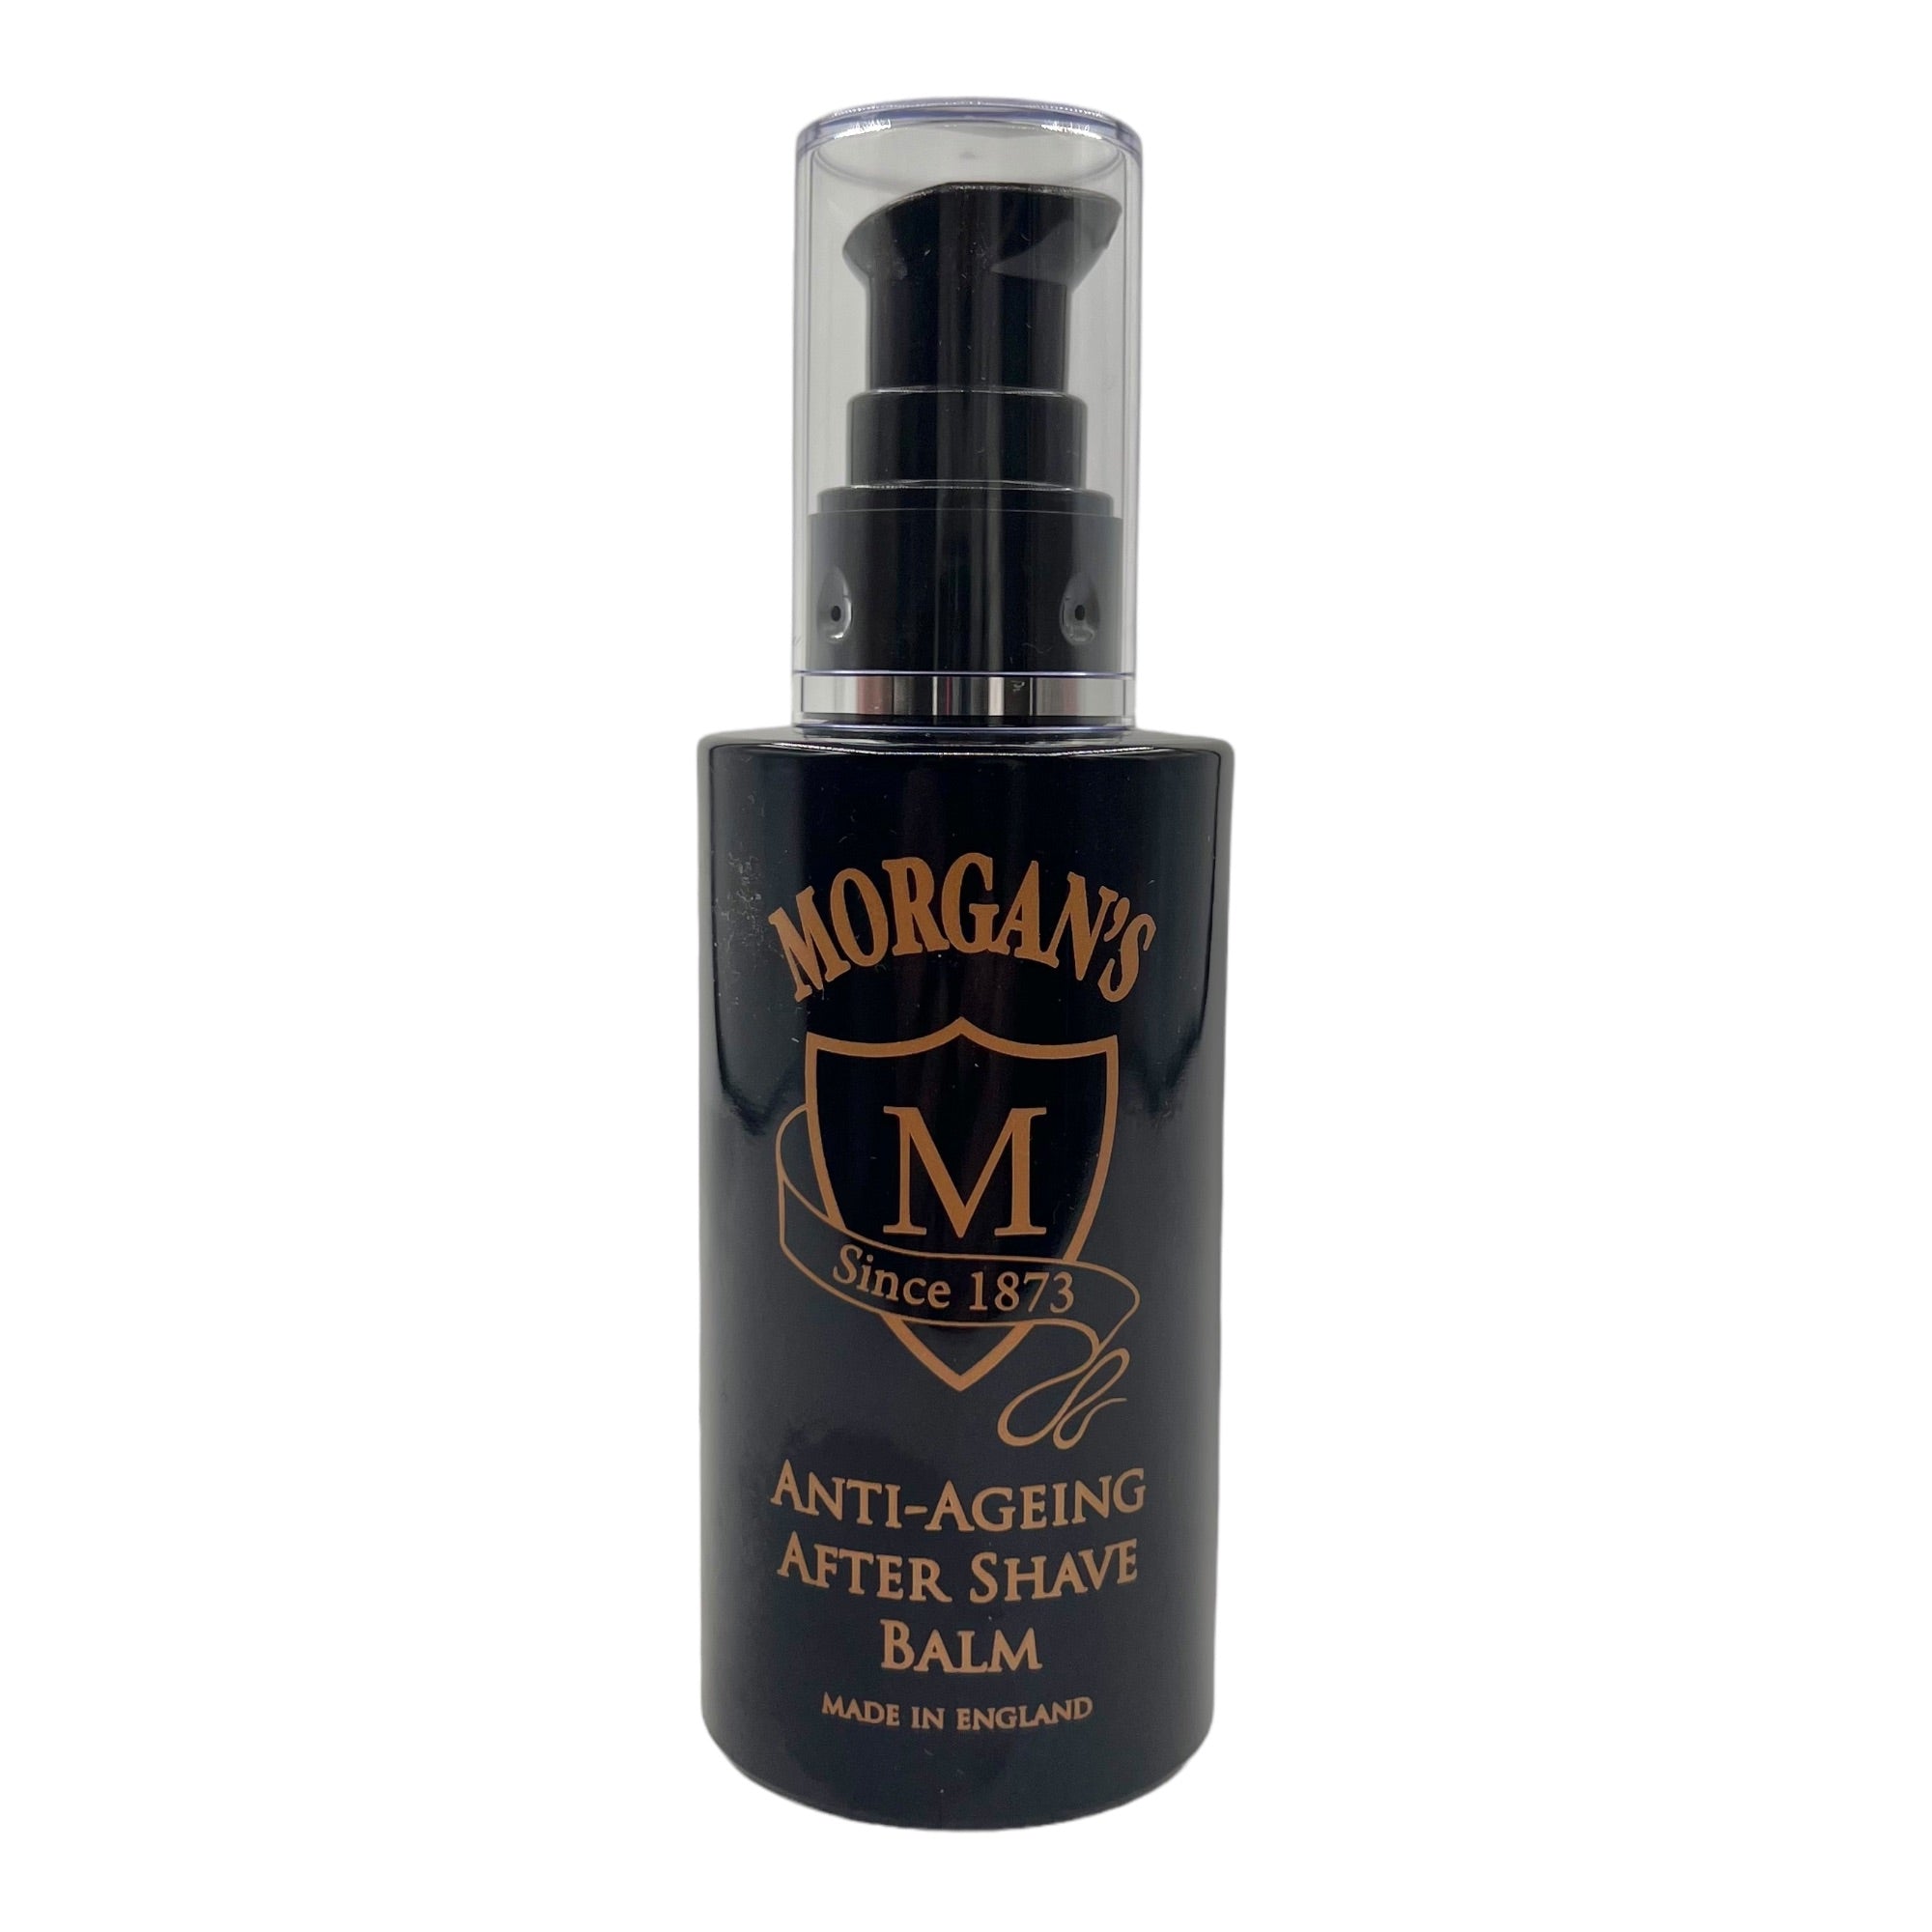 Morgan's - Anti-Ageing After Shave Balm 100ml